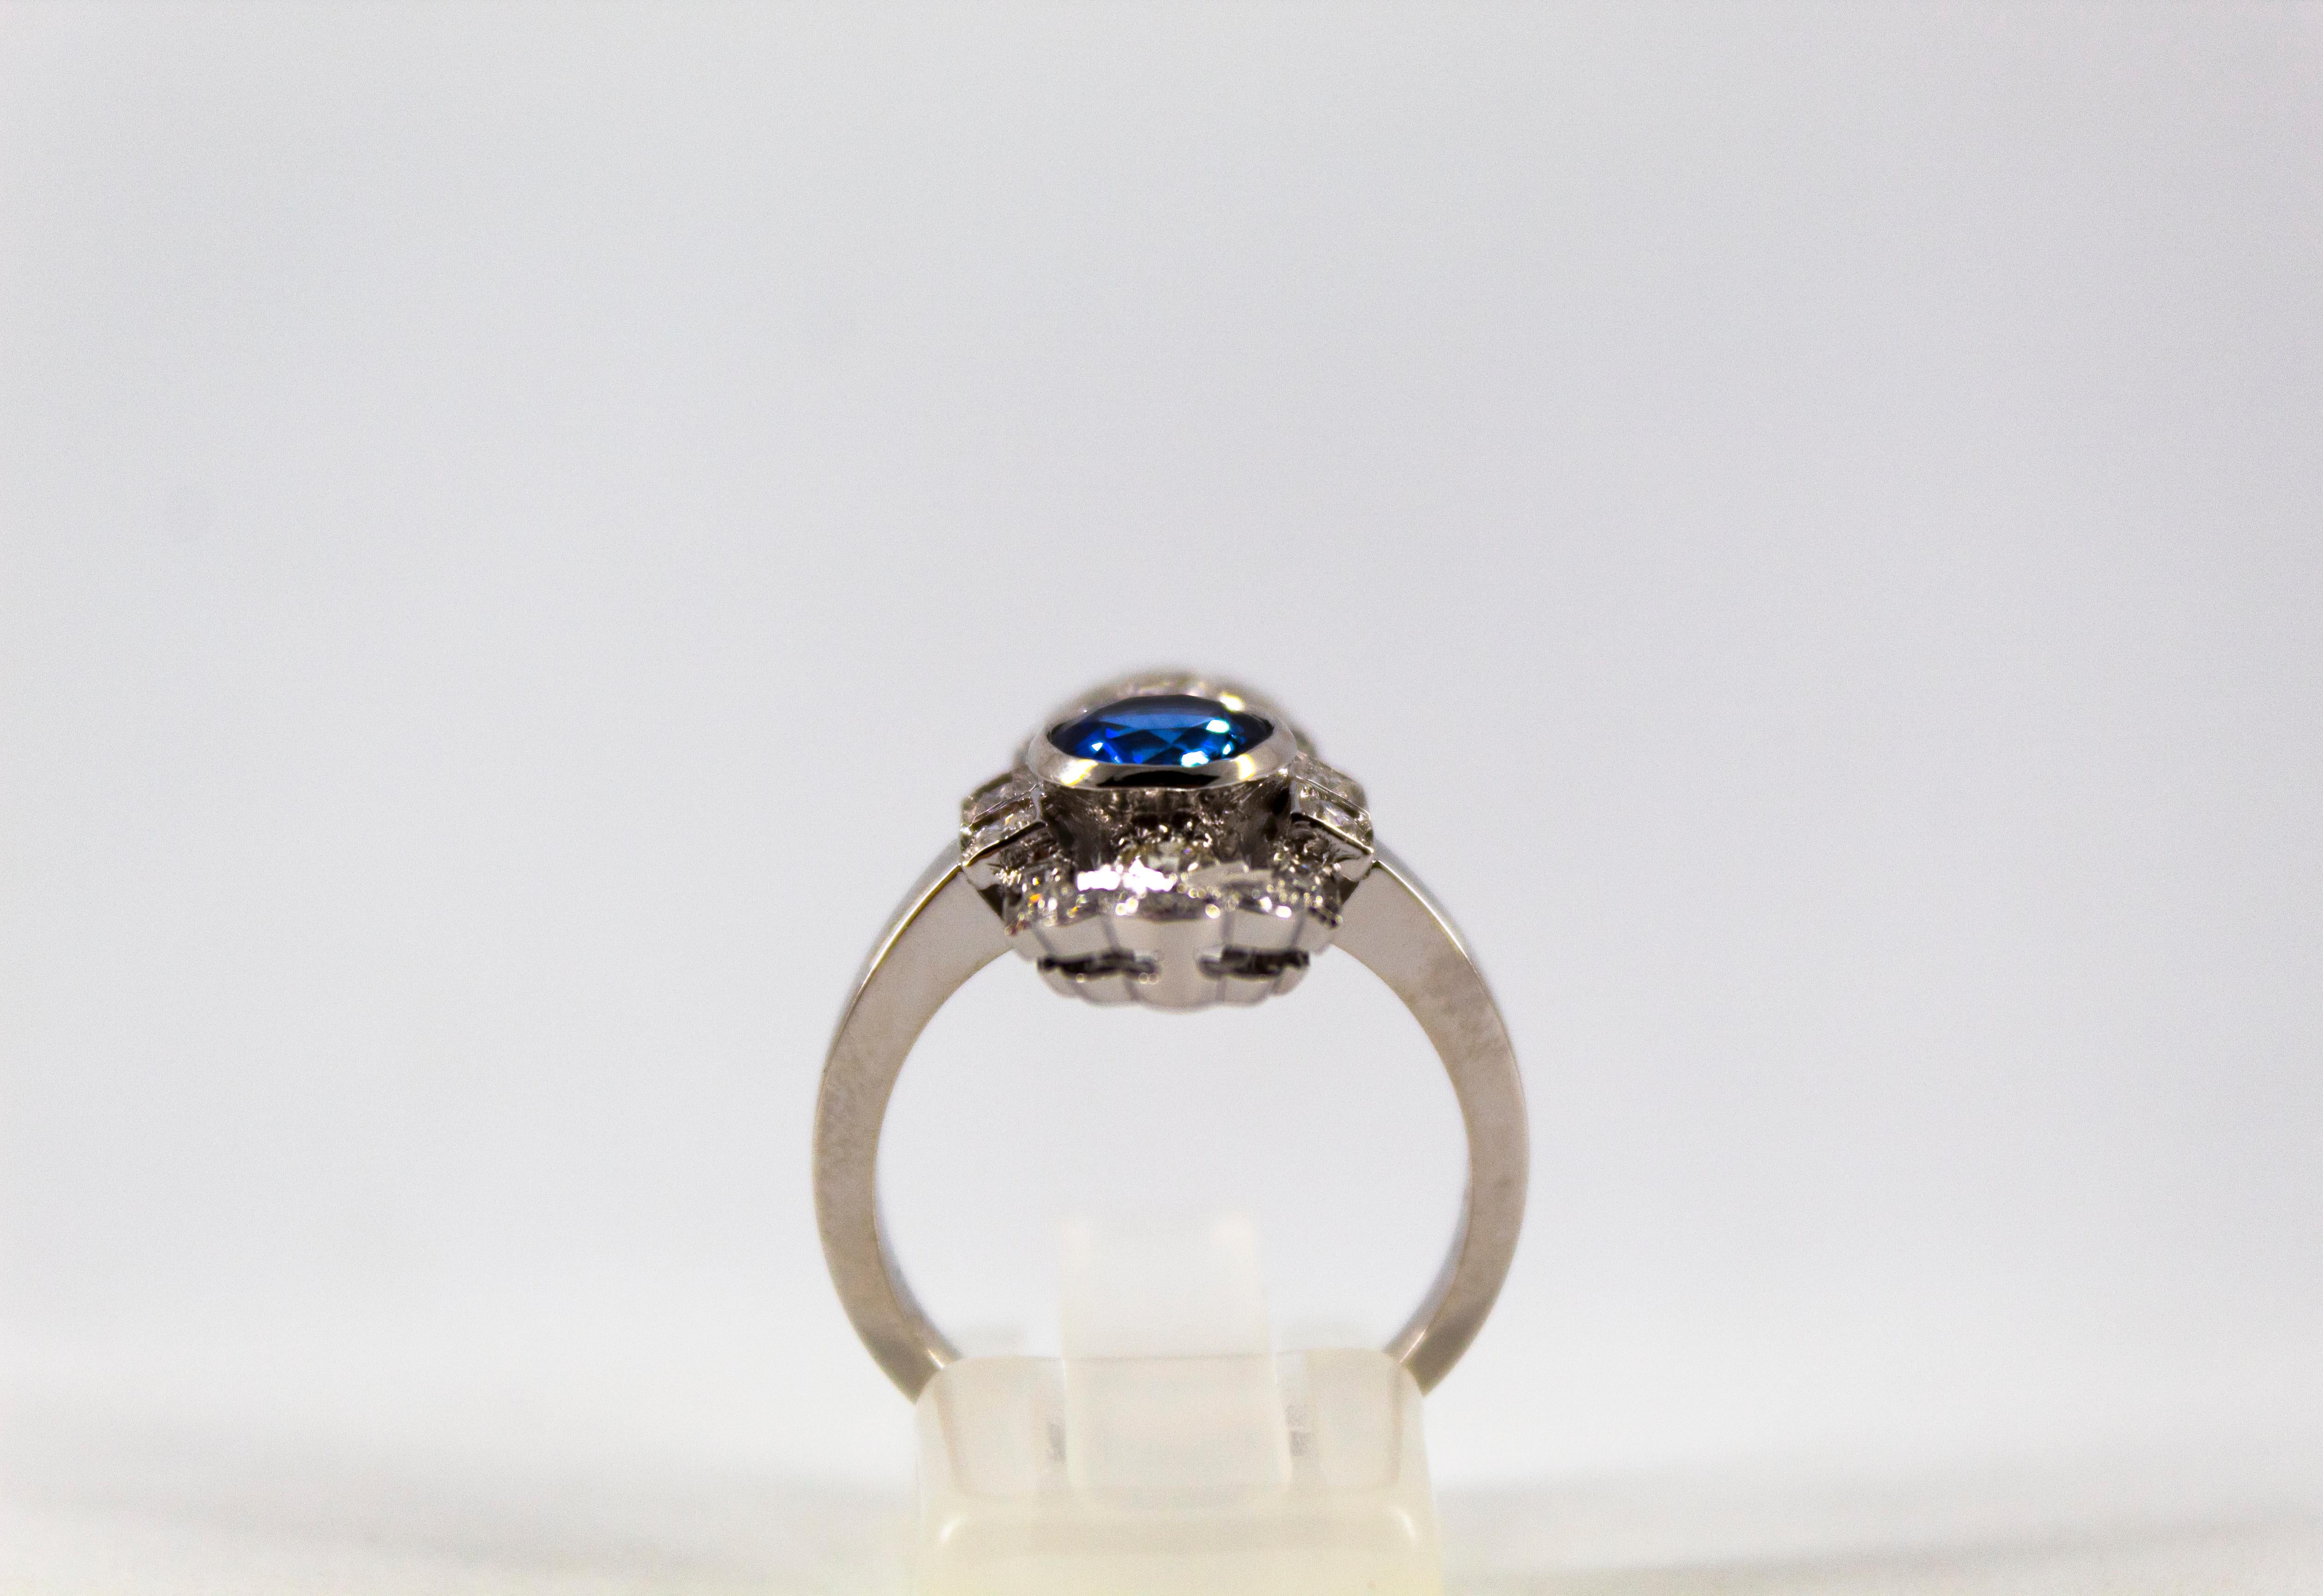 This Ring is made of 18K White Gold.
This Ring has 0.54 Carats of White Diamonds.
This Ring has a 1.37 Carats Blue Sapphire.
This Ring is available also with a central With Diamond.
Size ITA: 14 1/2 USA: 7
We're a workshop so every piece is